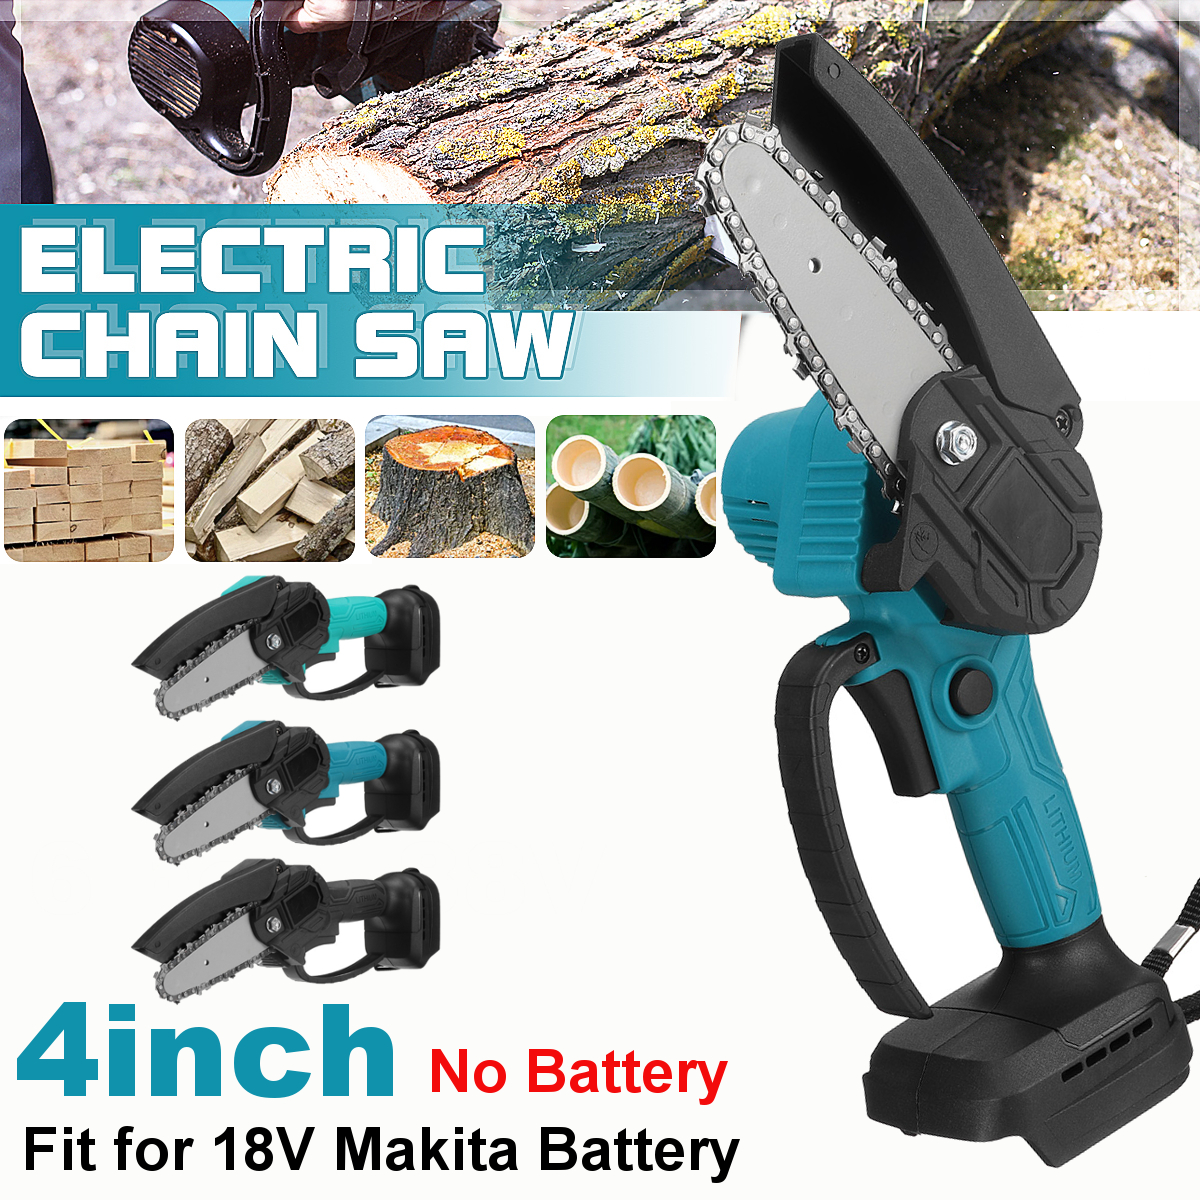 4-Inch-Electric-Chain-Saw-Cordless-Chainsaw-Multi-function-Woodworking-Wood-Cutter-For-Makita-18V-Ba-1861026-2